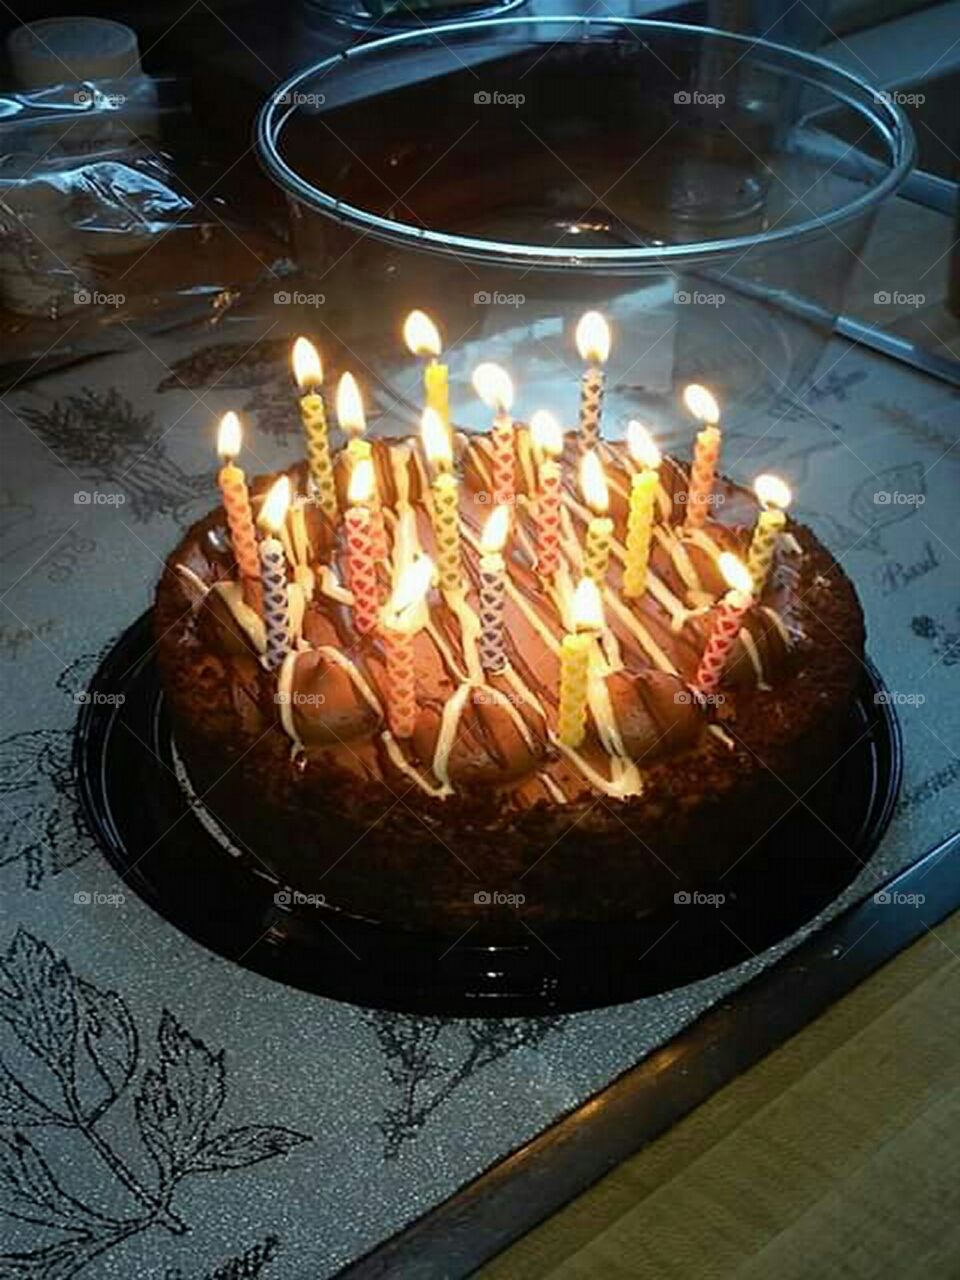 delicious looking chocolate birthday cake with birthday candles lit